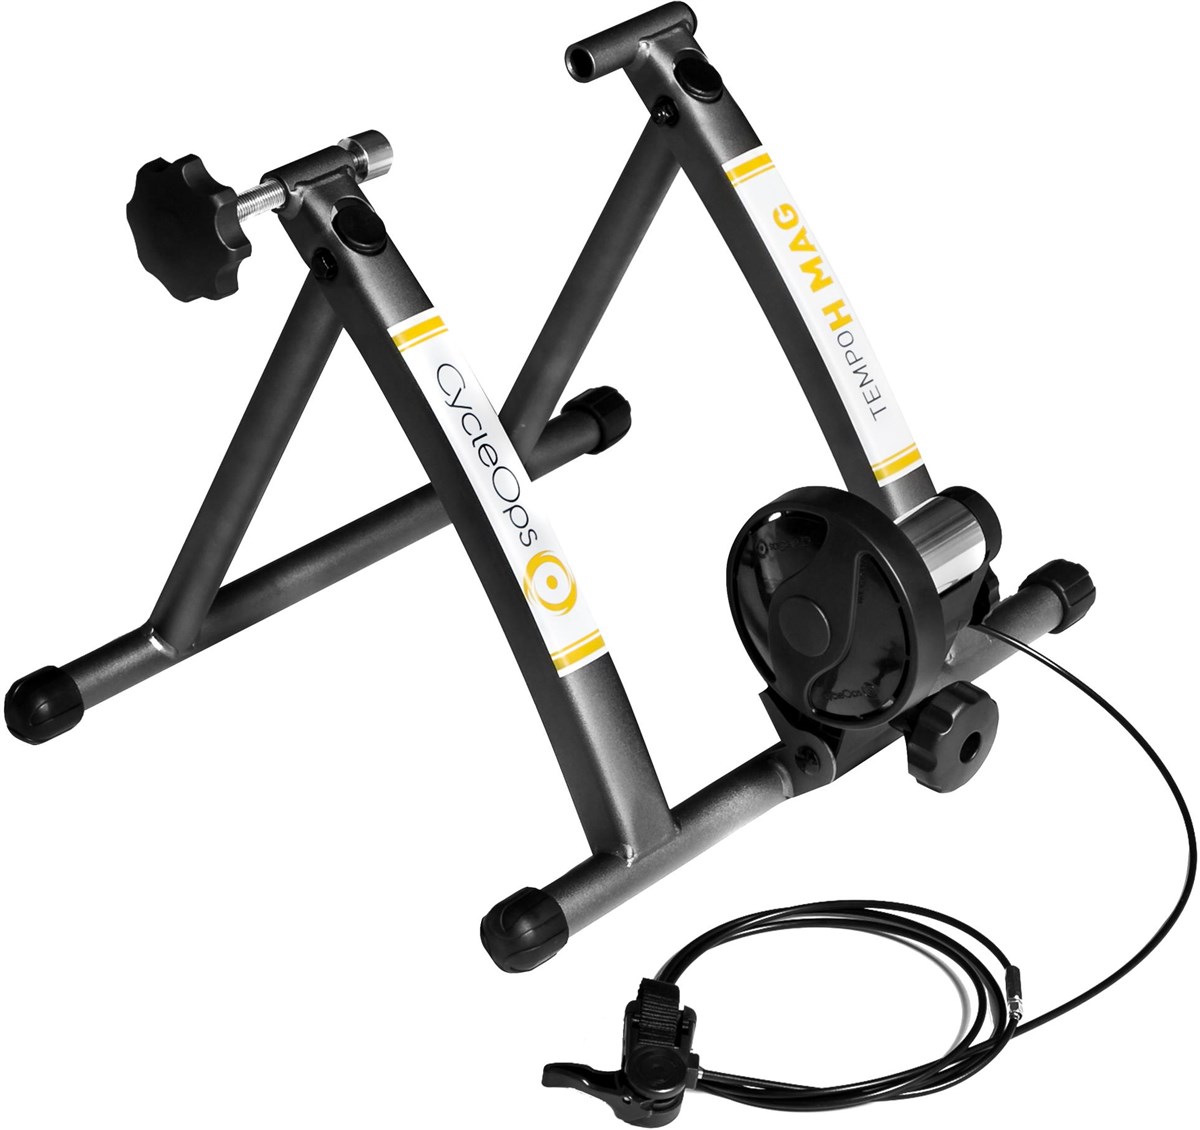 CycleOps Tempo H Mag Turbo Trainer product image